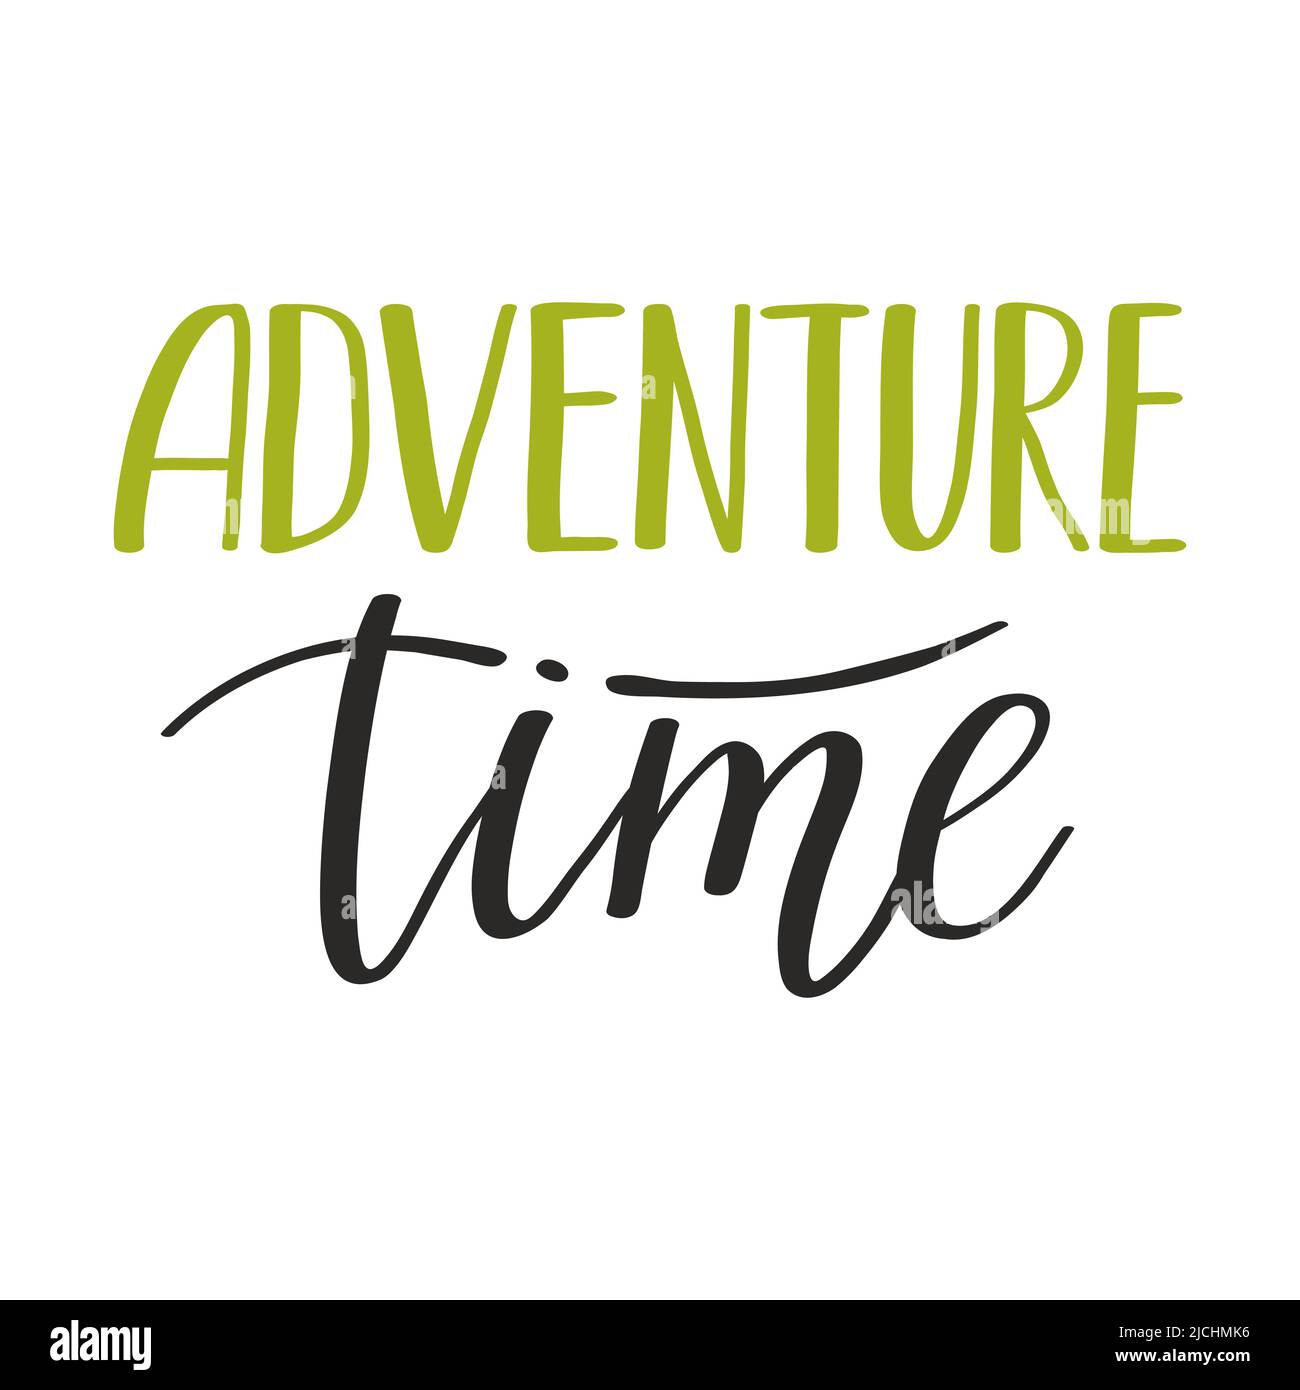 A handwritten phrase - Adventure time. Motivational quote typography. Text element for cards, posters, banners on camping, tourism, hiking. Color flat Stock Vector